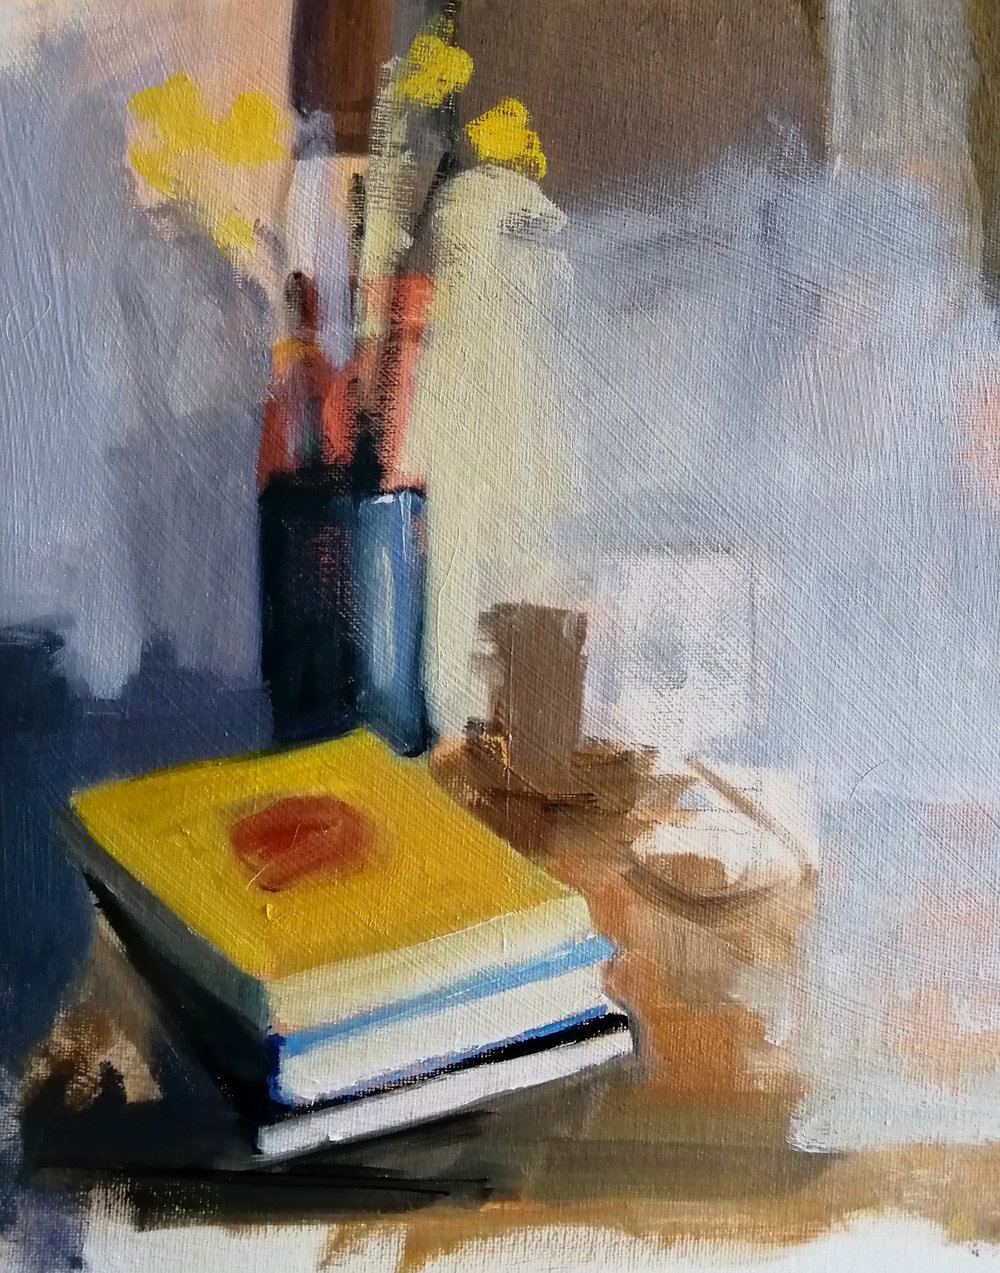  Daffodils and books beside my bed    Oil on board  26x31cm  SOLD  An impressionist sketch of books and flowers on a bedside table. Atmospheric and intimate 